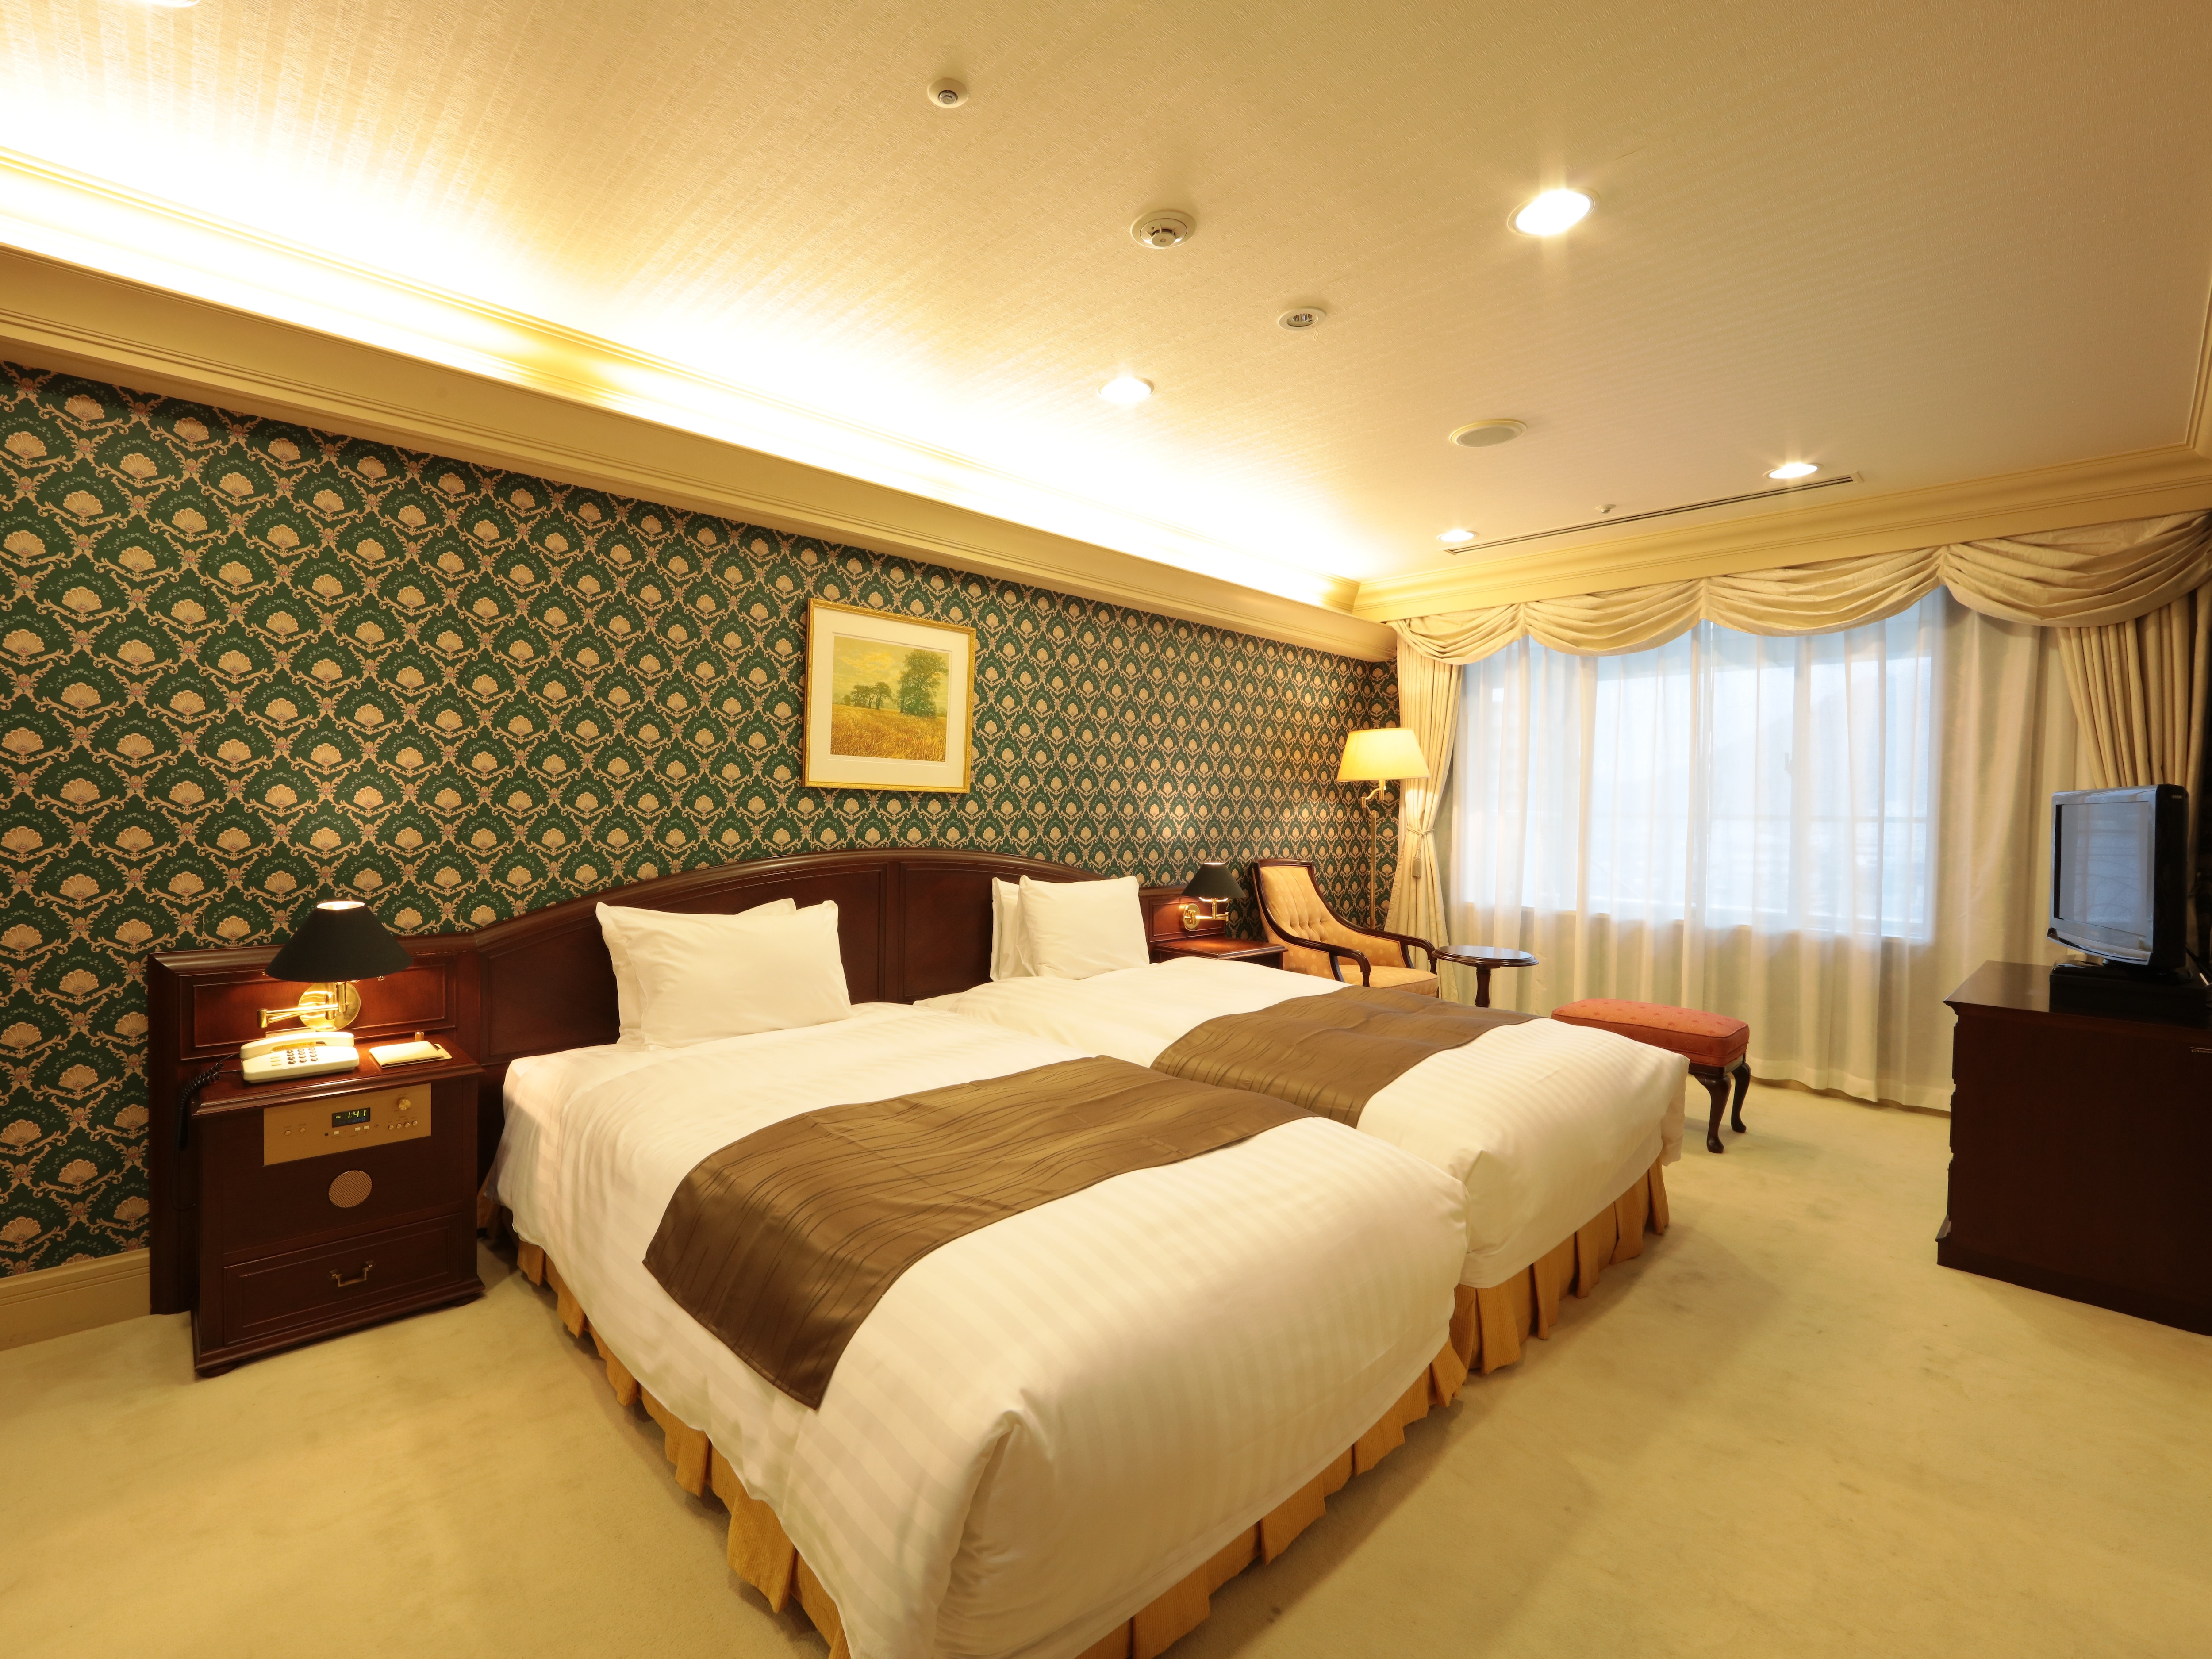 * [Suite room] 82 m2 in size, top-class room with European-style interior